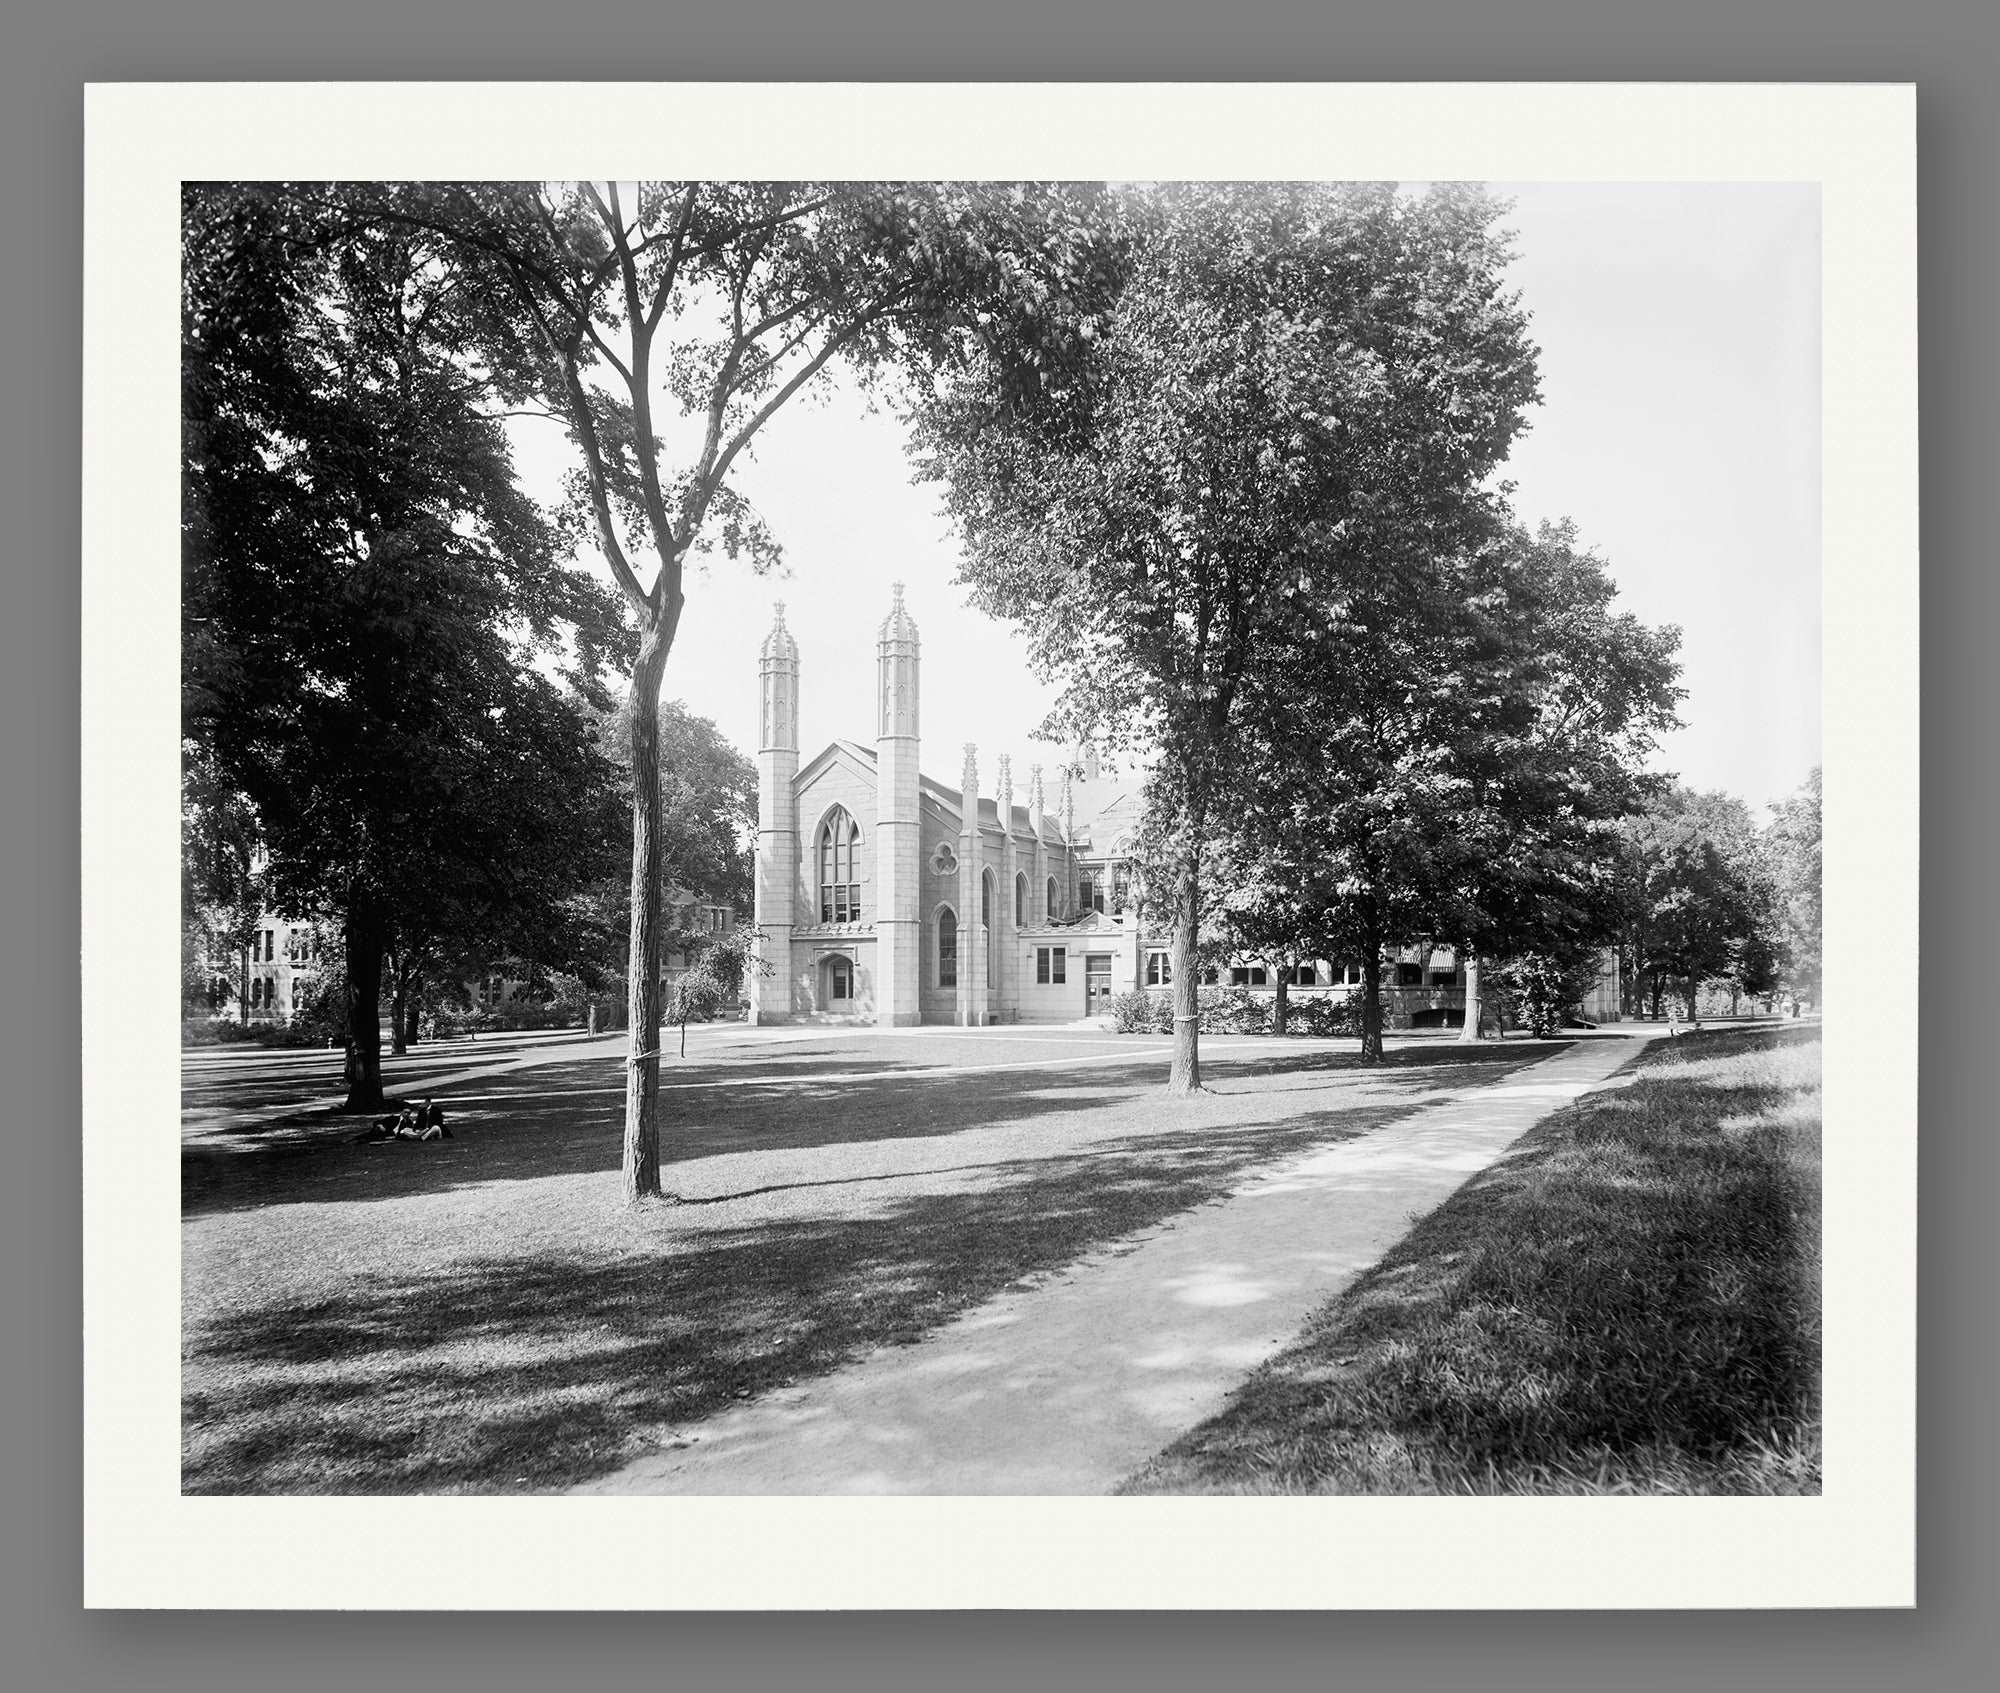 A fine art paper print of a vintage image of Hardvard's campus